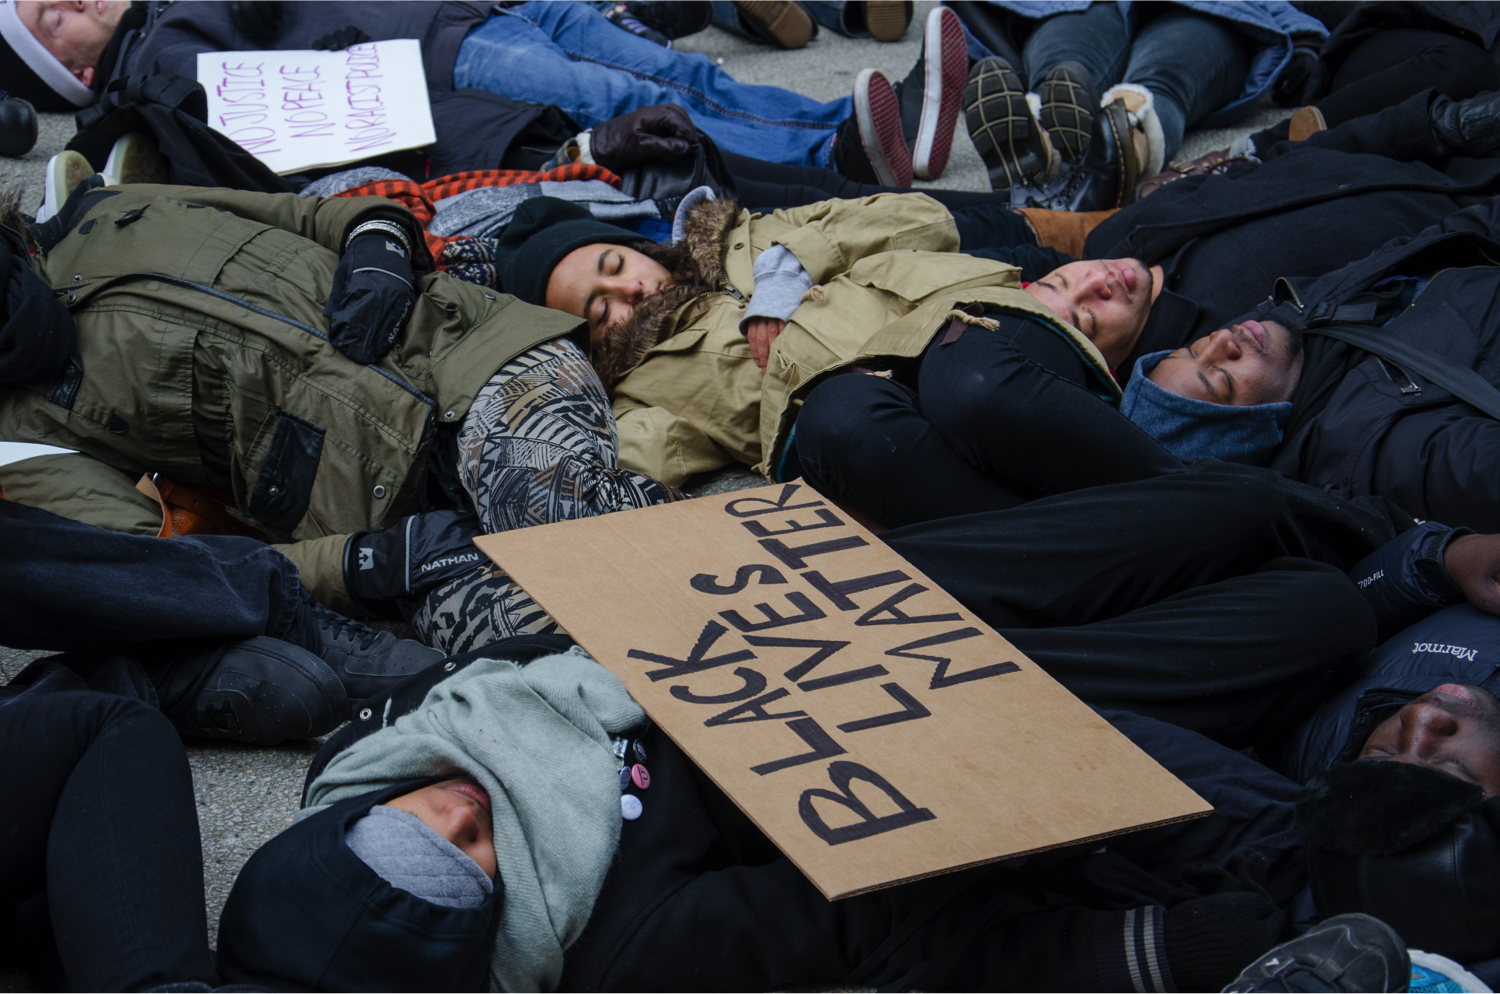 Protesters stage a “die-in” at Water Tower Plaza. 'We chose here so that we could be out here for four-and-a-half hours, which is the amount of time Michael Brown's body was left in the street,' said Kristiana Colón, director of Let Us Breathe Collective. (Jin Wu/Medill)